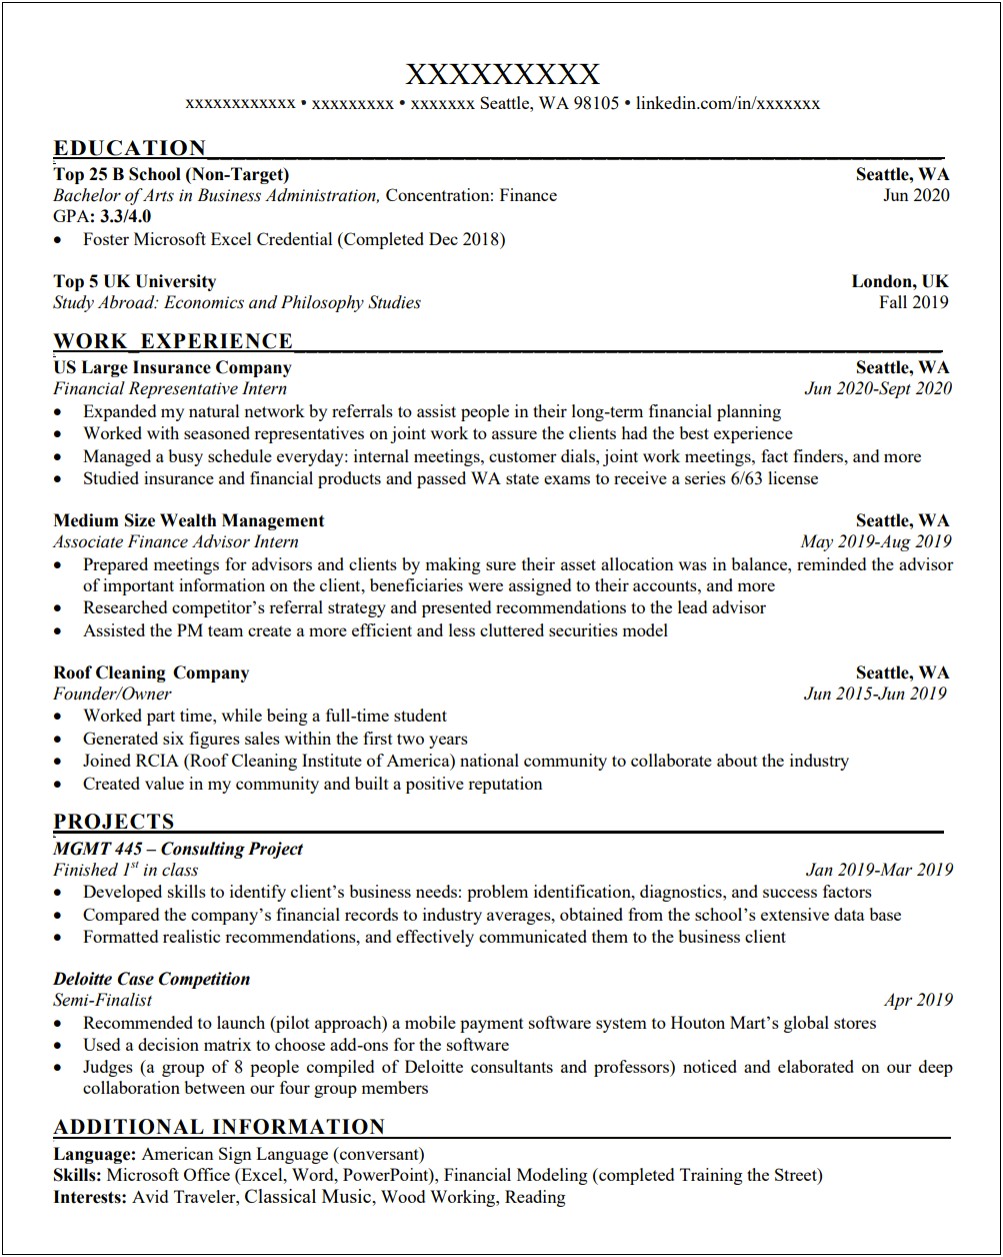 Private Wealth Management Associate Resume